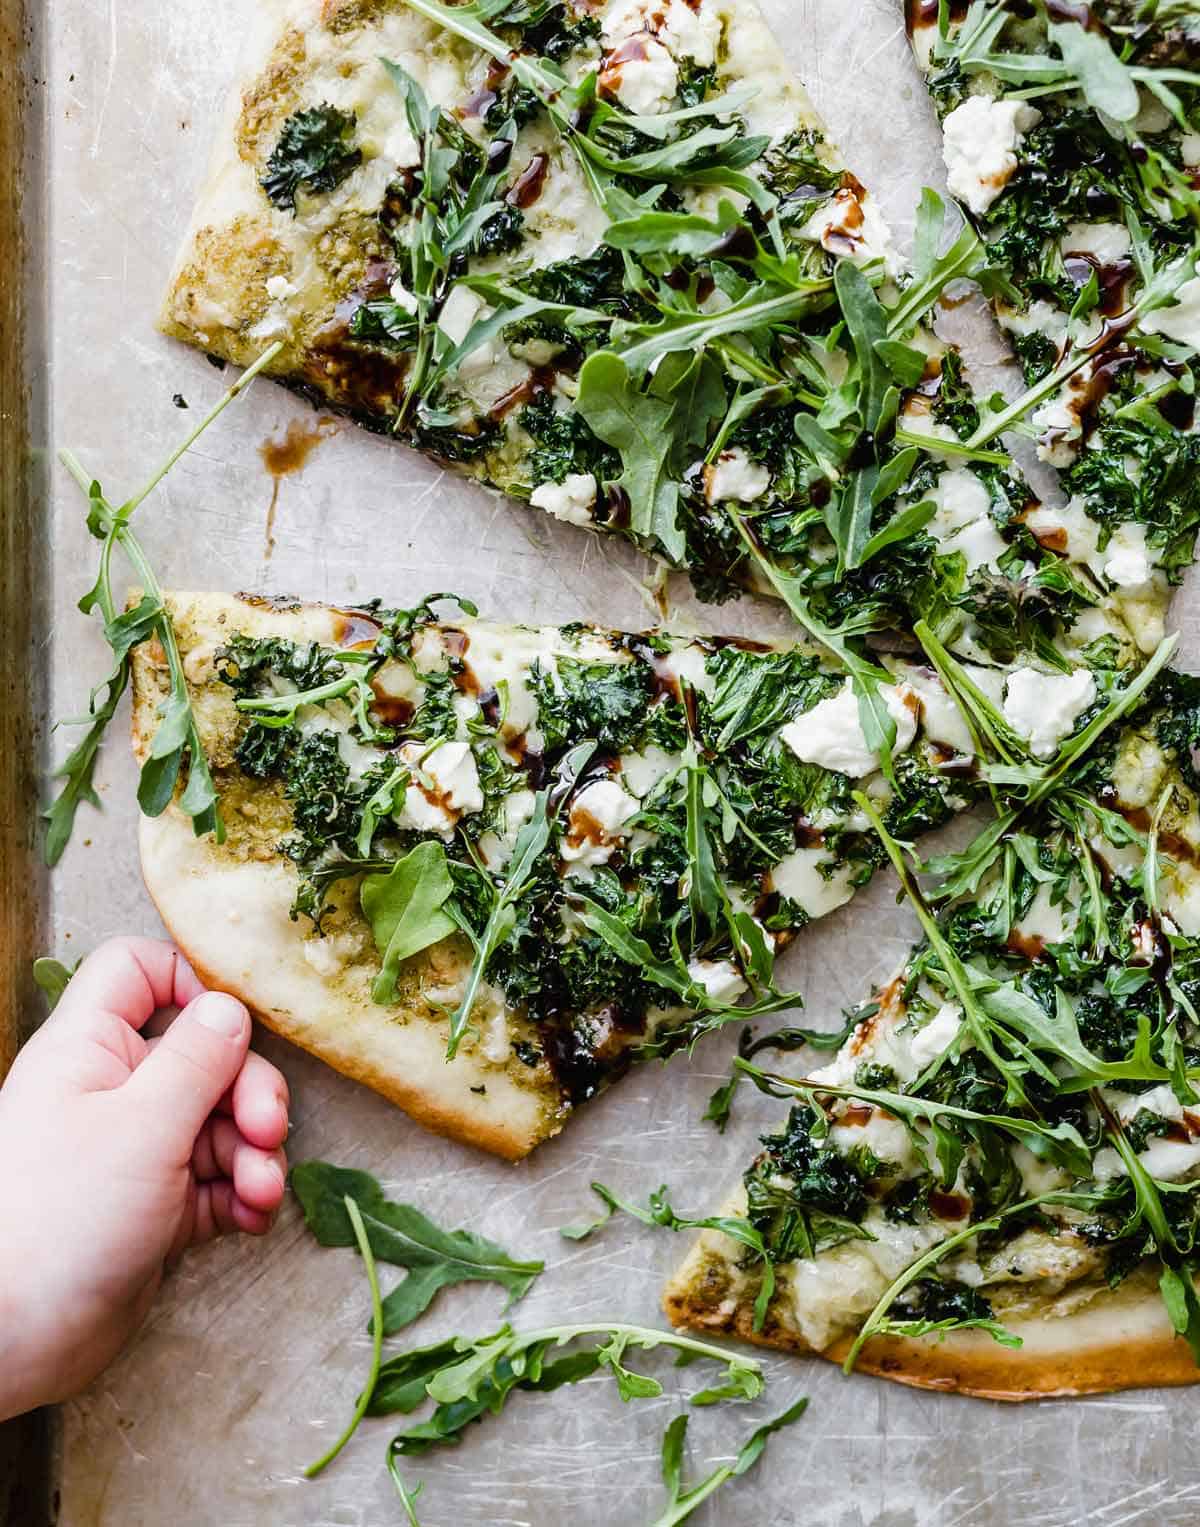 A small child's hand grabbing a slice of homemade kale pizza topped with arugula and balsamic glaze.